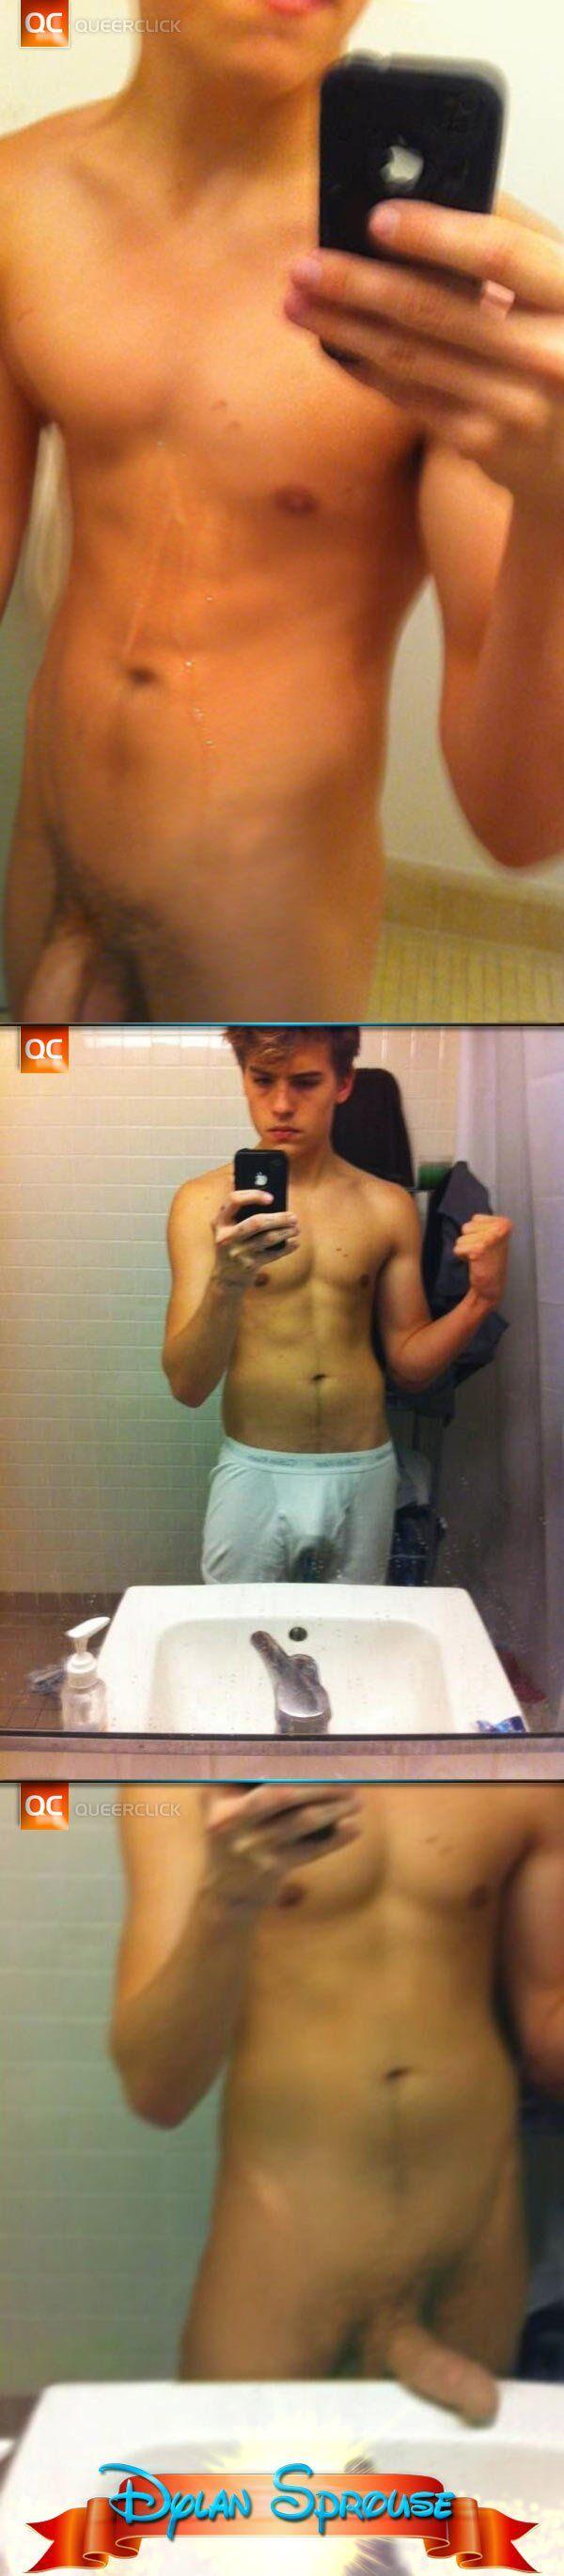 Uncensored dylan sprouse nudes